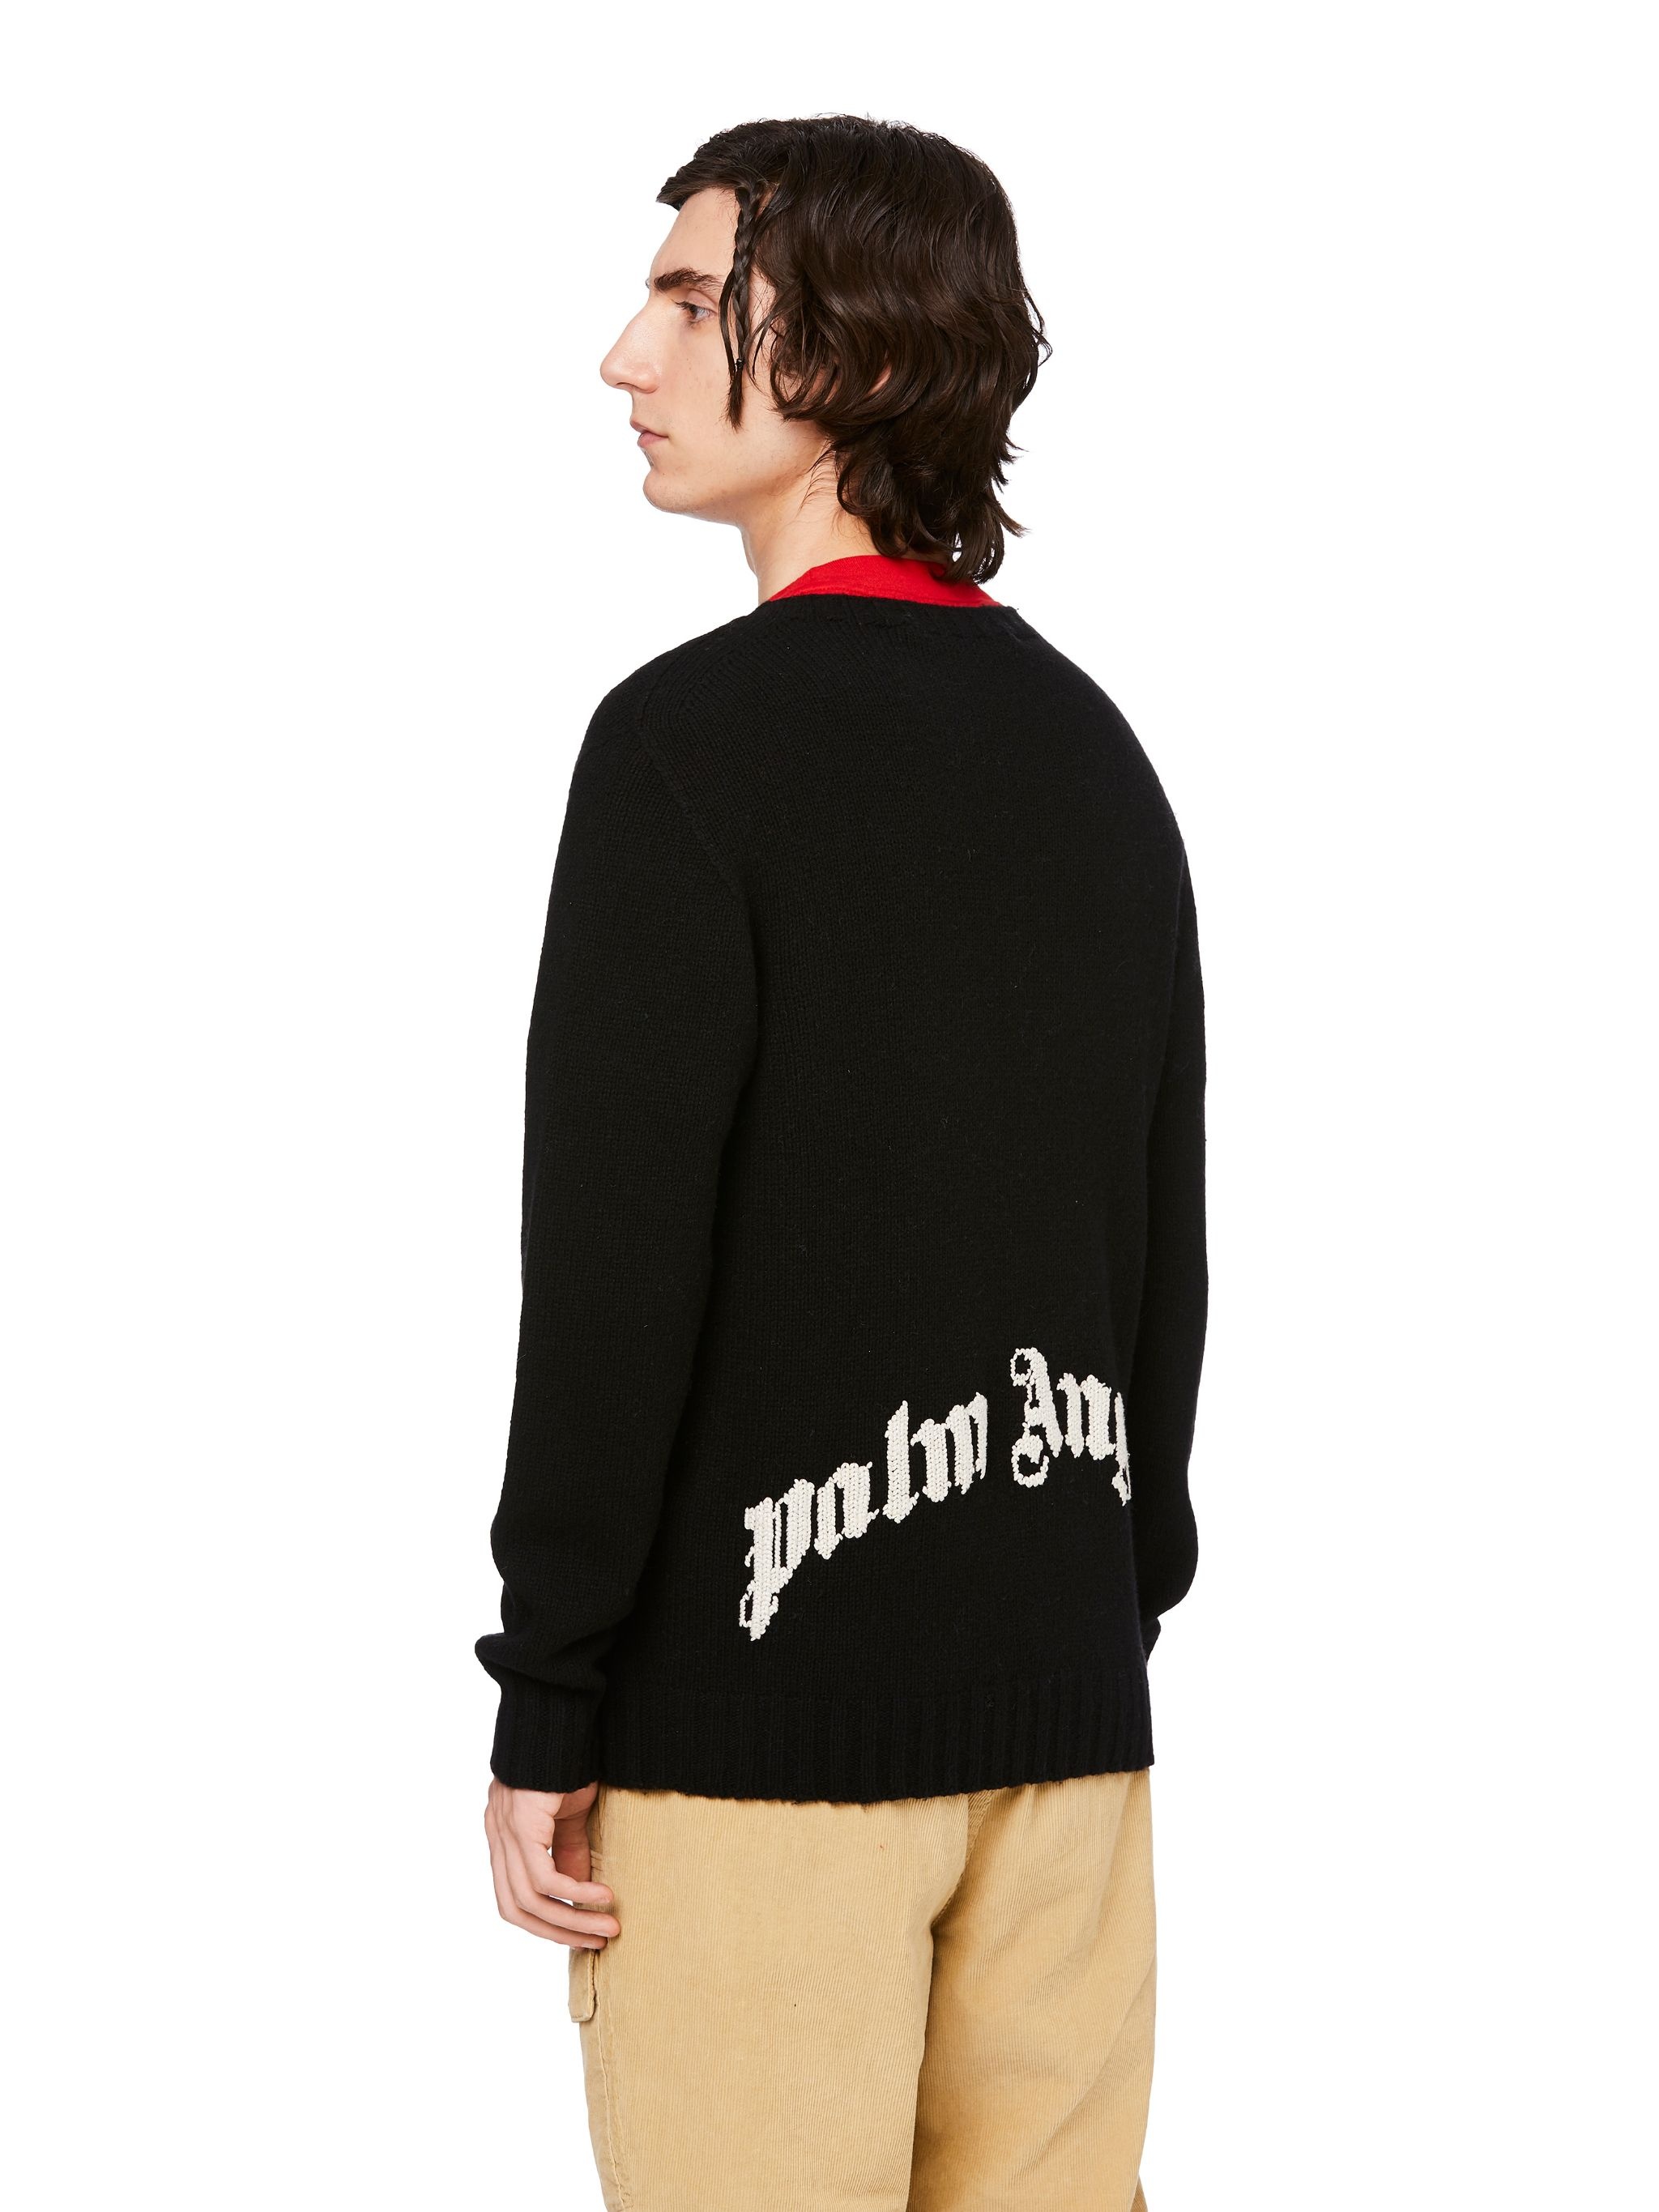 CURVED LOGO SWEATER - 5